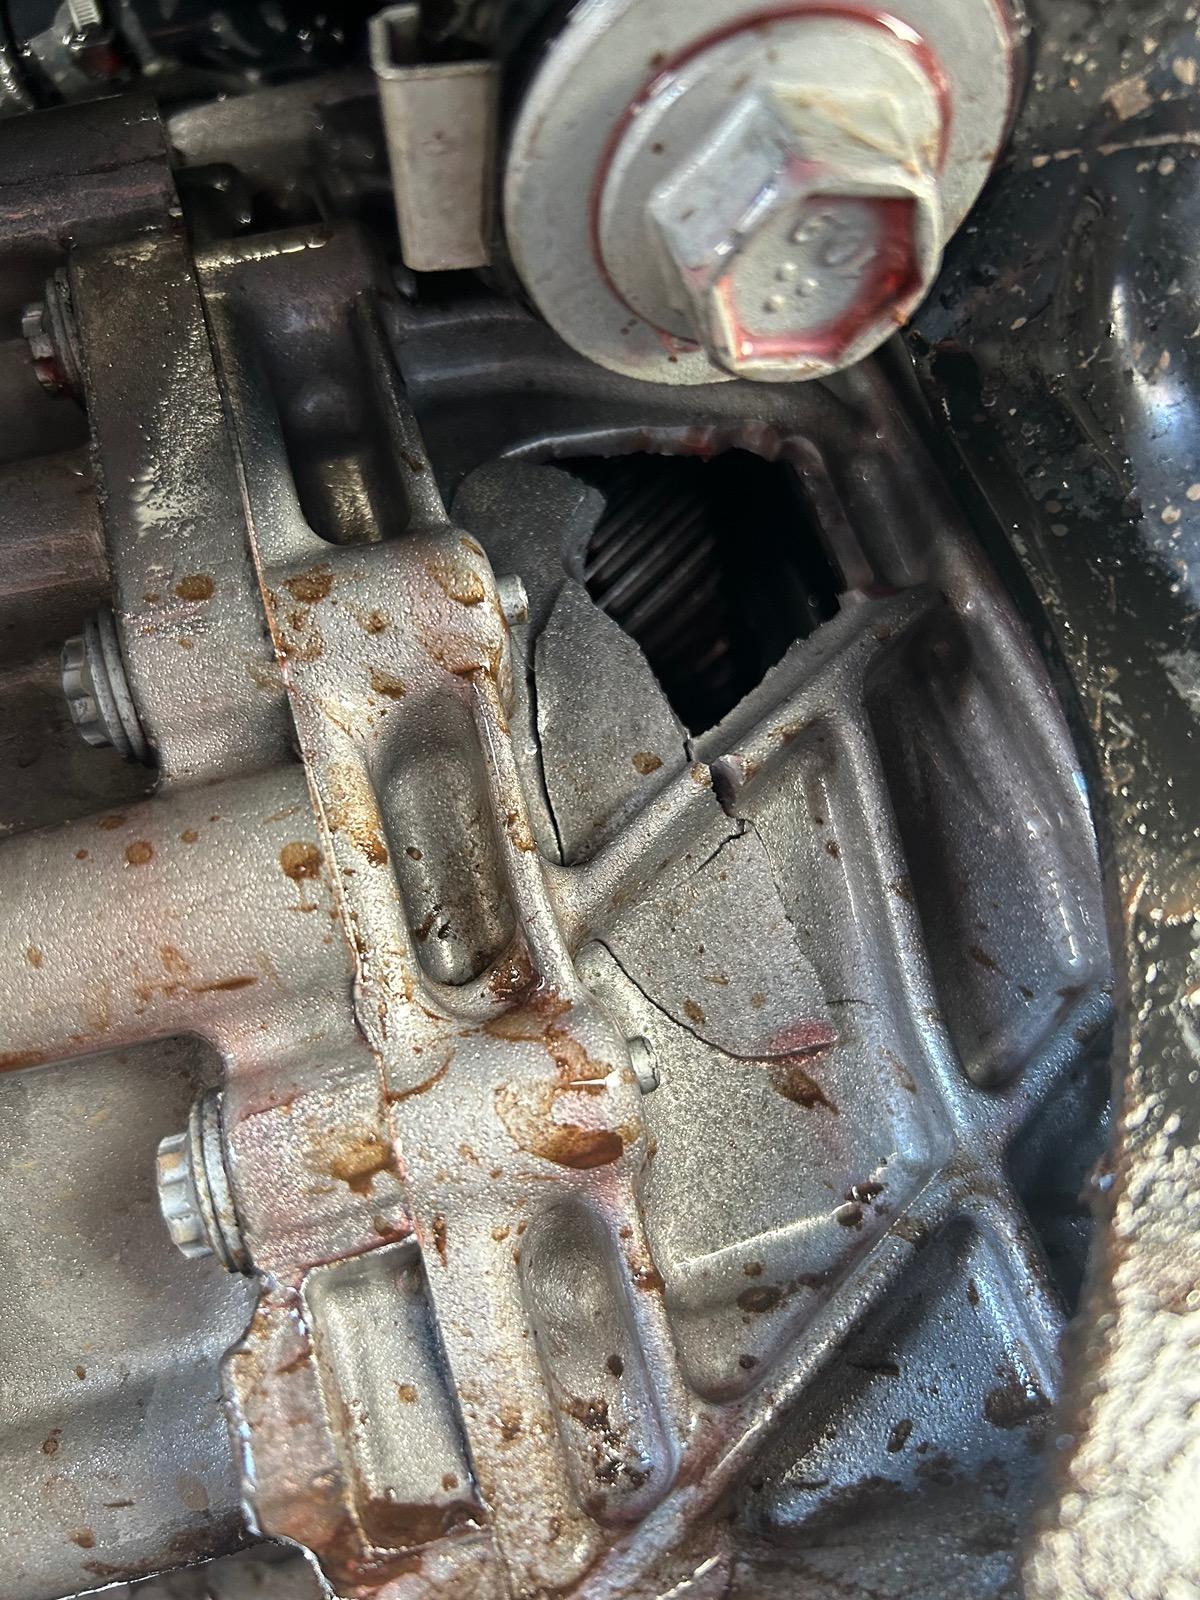 Ford F-150 Lightning Rear motor rattling with red fluid leaking IMG_3810